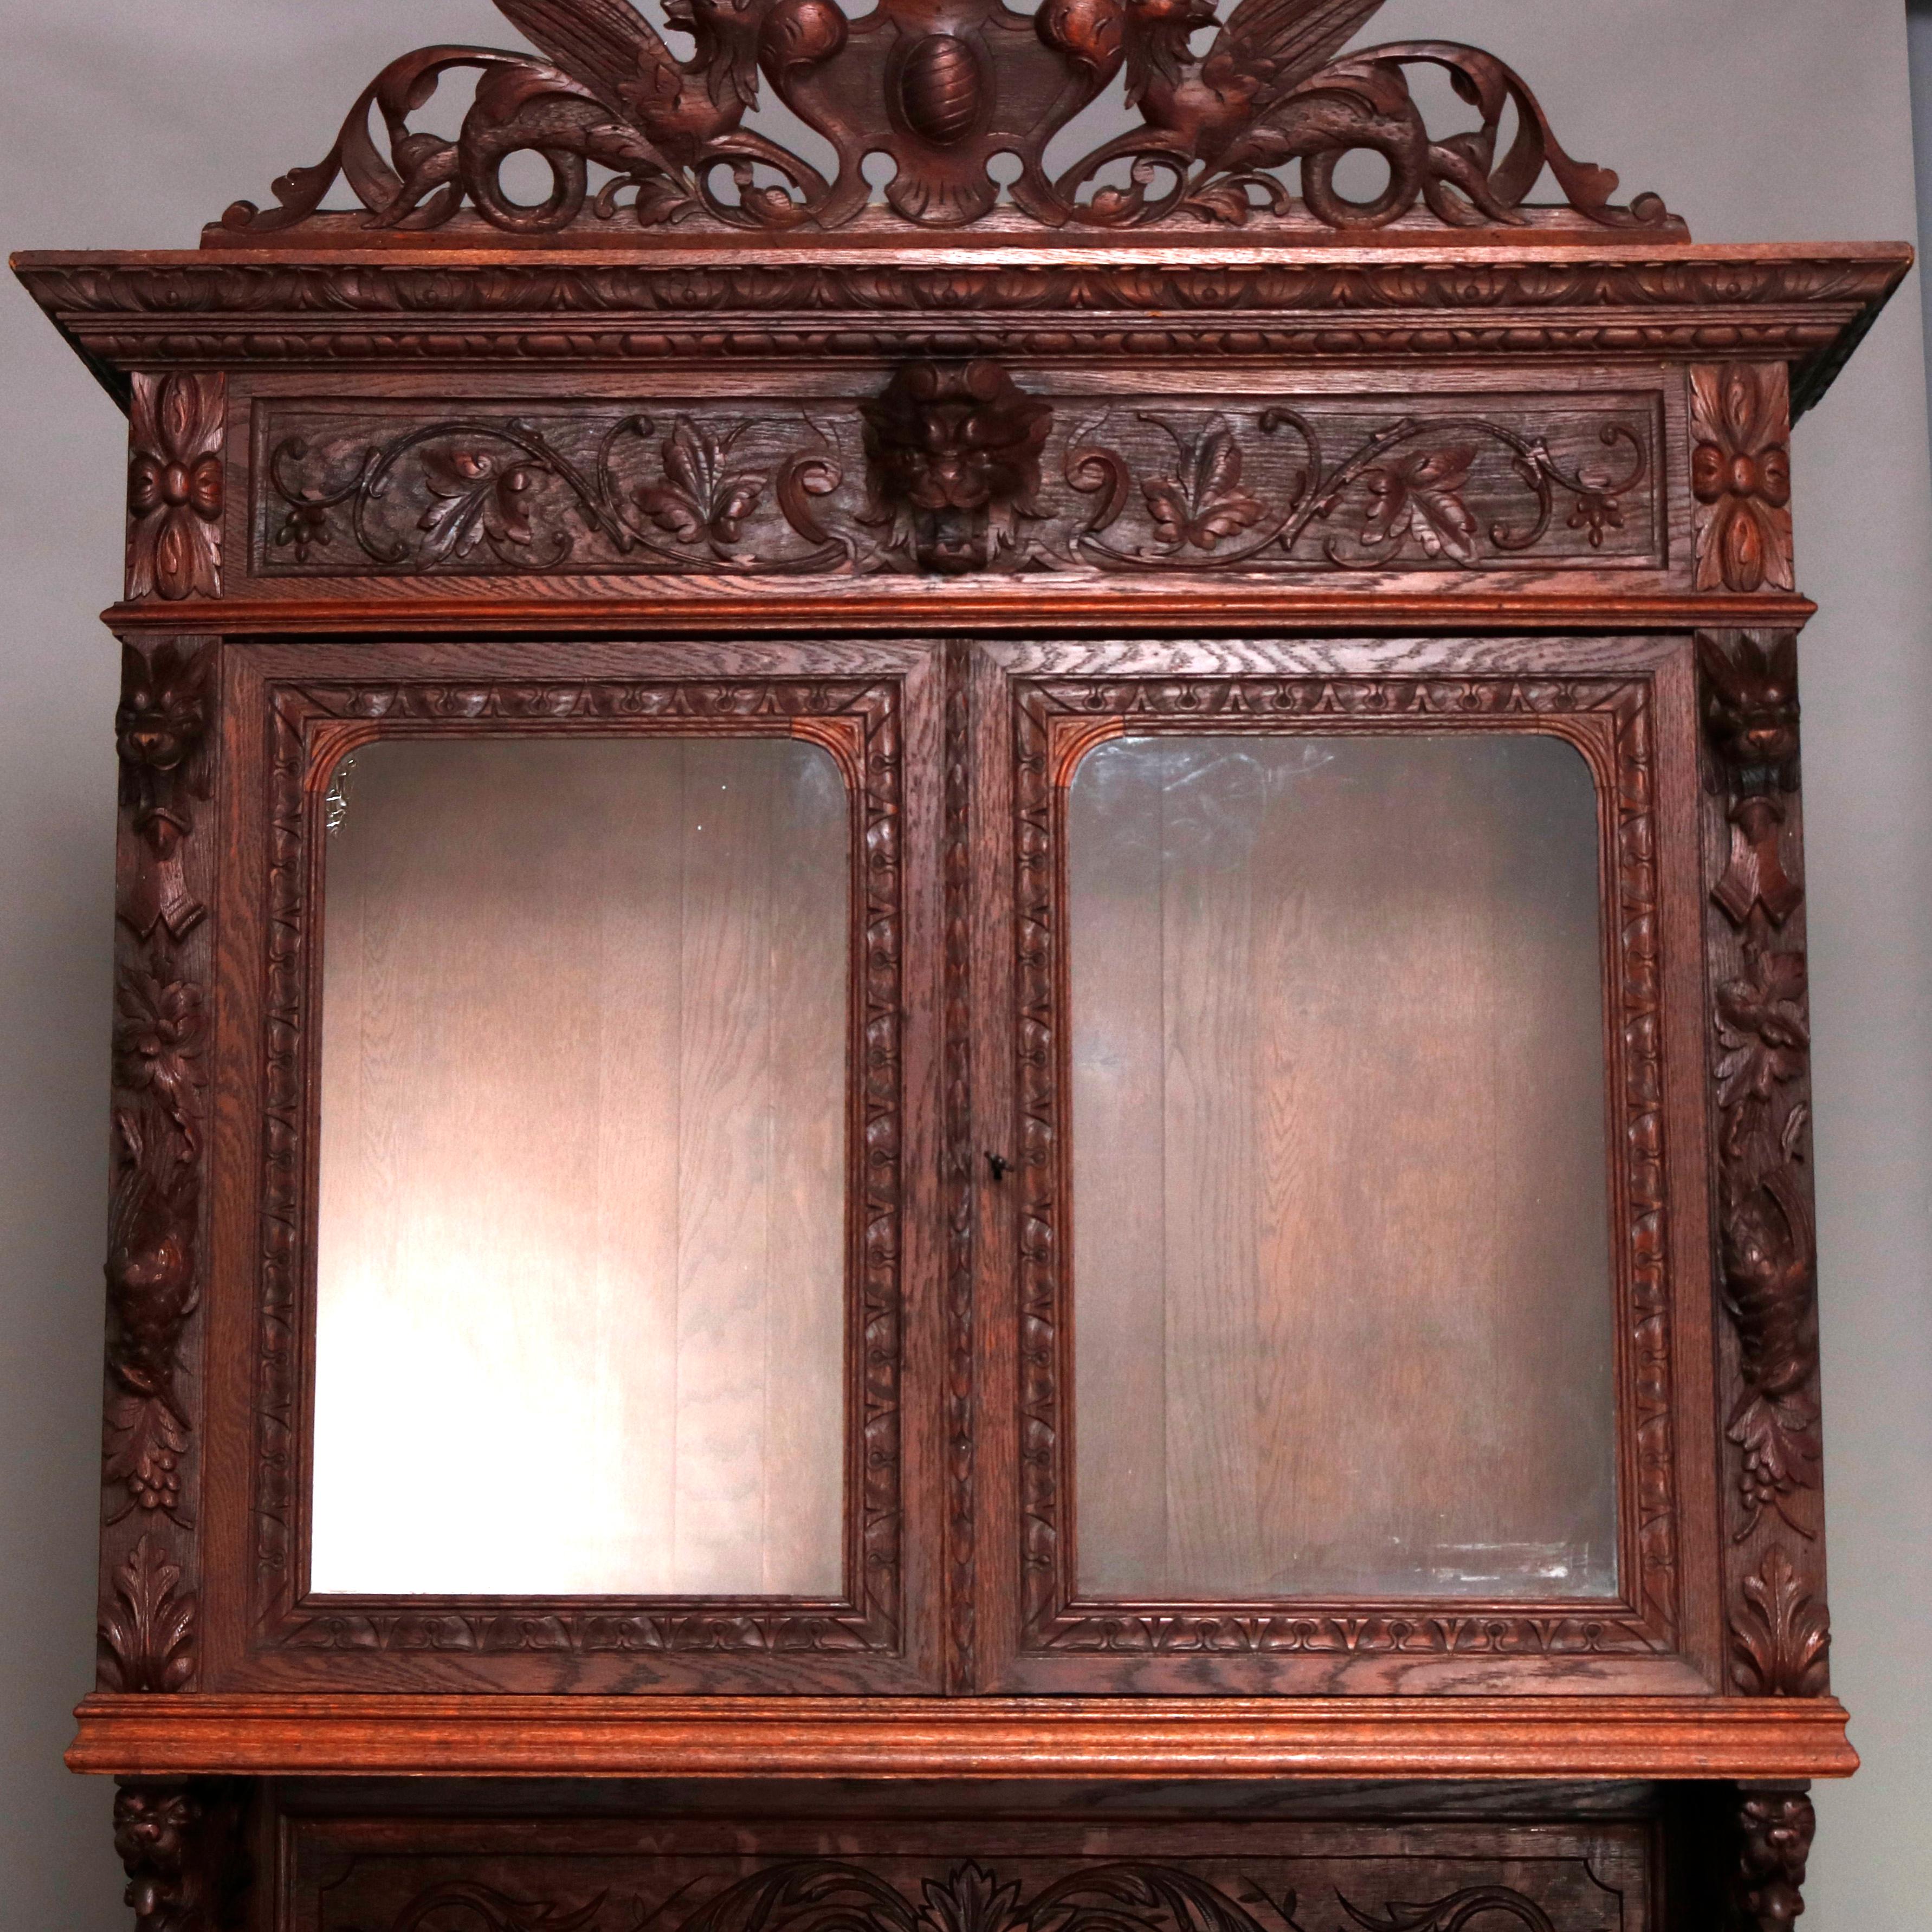 An antique German Black Forest figural hunt board breakfront cabinet offers oak construction with carved crest having central urn with flanking griffins and foliate decoration surmounting upper cabinet with double glass doors with carved griffin